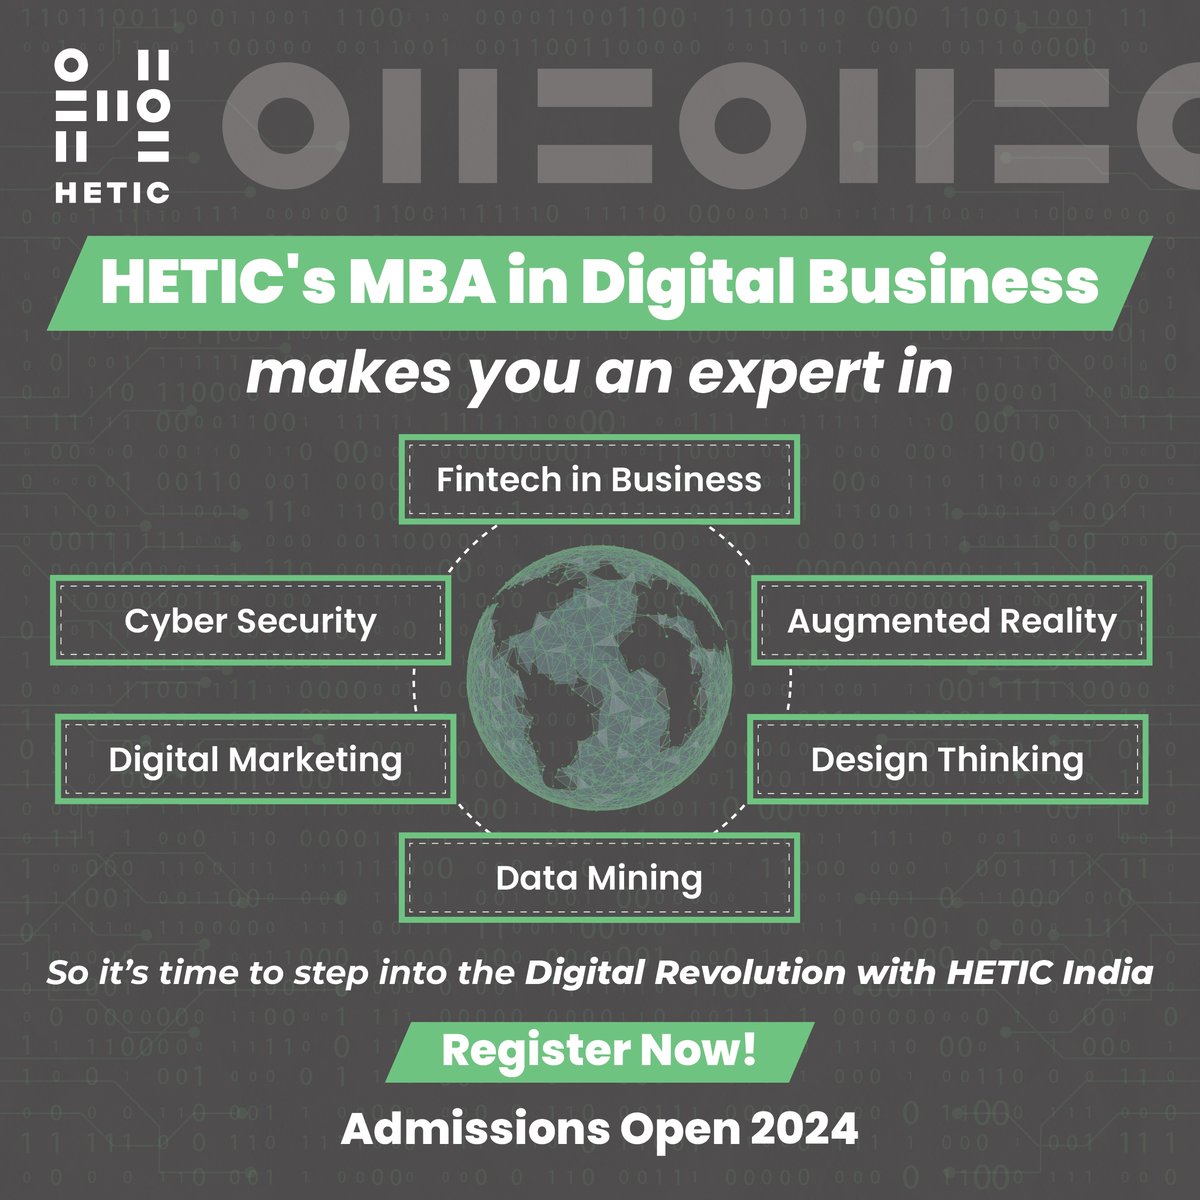 Here's why you should Consider a career in Digital Business from HETIC India to stay competitive and safeguard digital assets.

#digitalbusiness #digitalrevolution #cybersecurity #DigitalMarketing  #designthinking